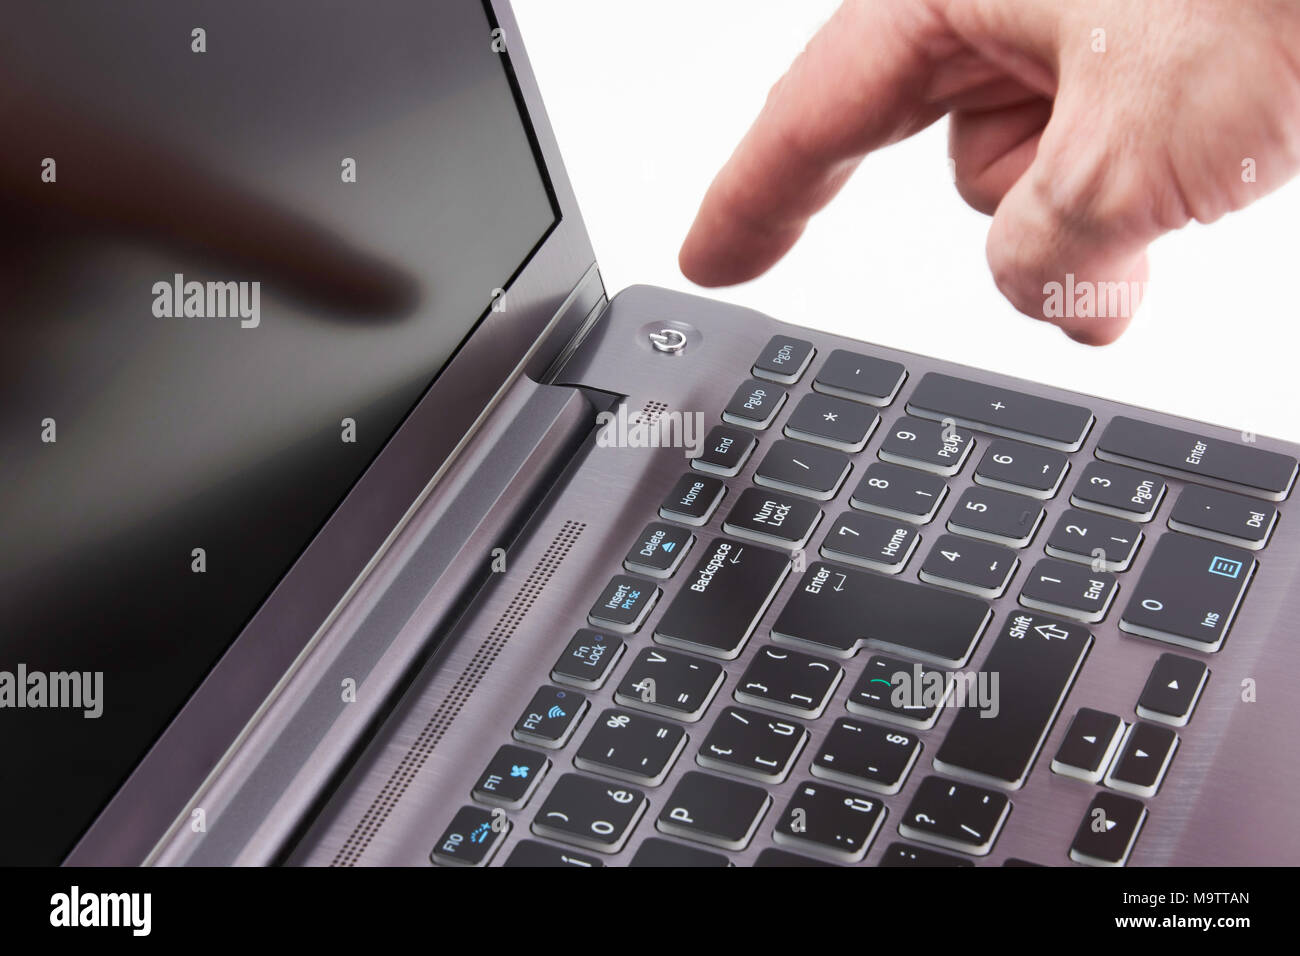 Silver laptop and moving man's hand catching start button, isolated on white background Stock Photo